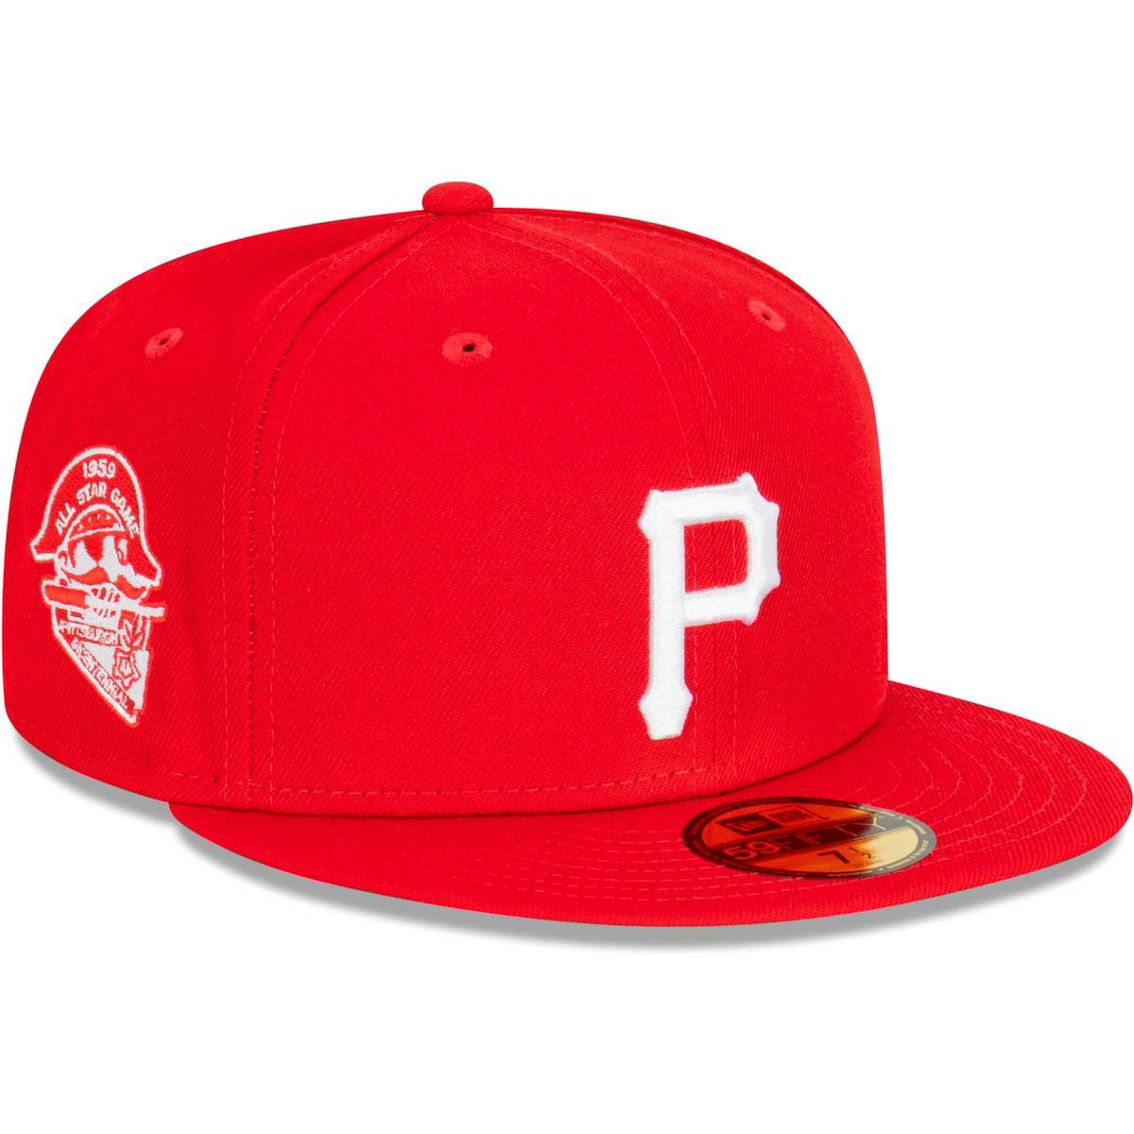 New Era Men's Red Pittsburgh Pirates Sidepatch 59FIFTY Fitted Hat - Image 2 of 4